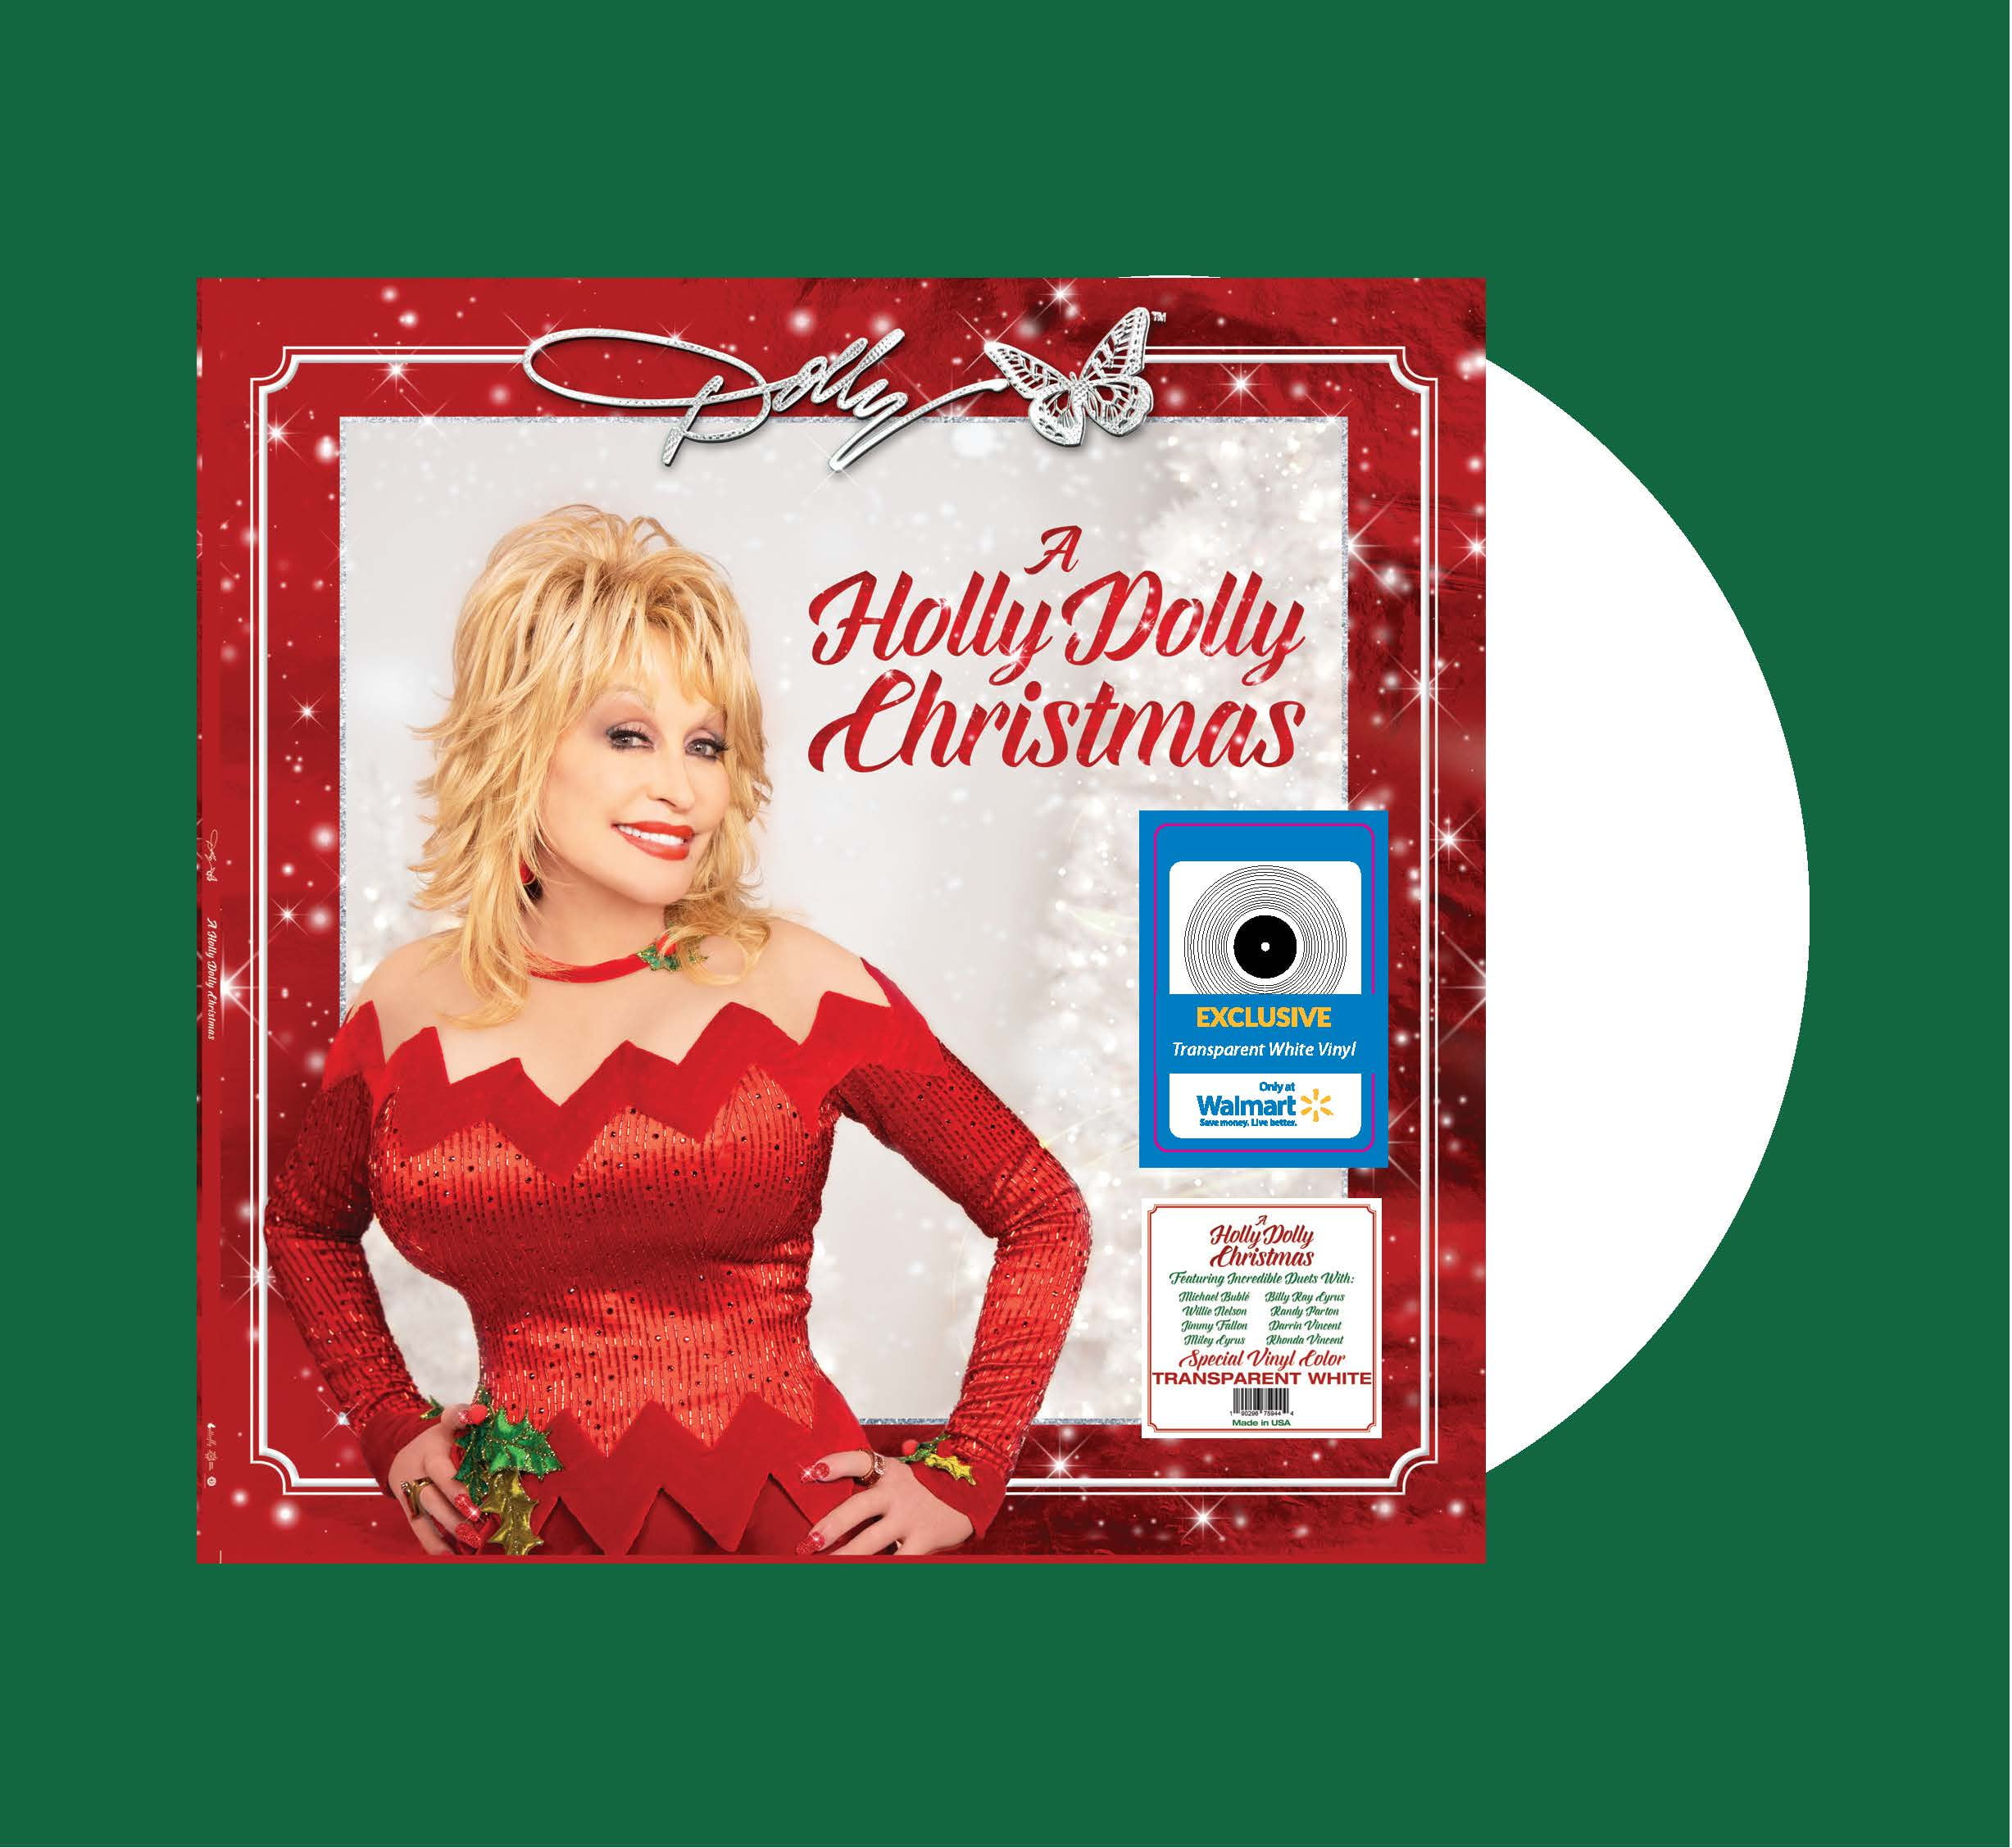 Label promo! Dolly Parton Signed HOLLY DOLLY CHRISTMAS album 